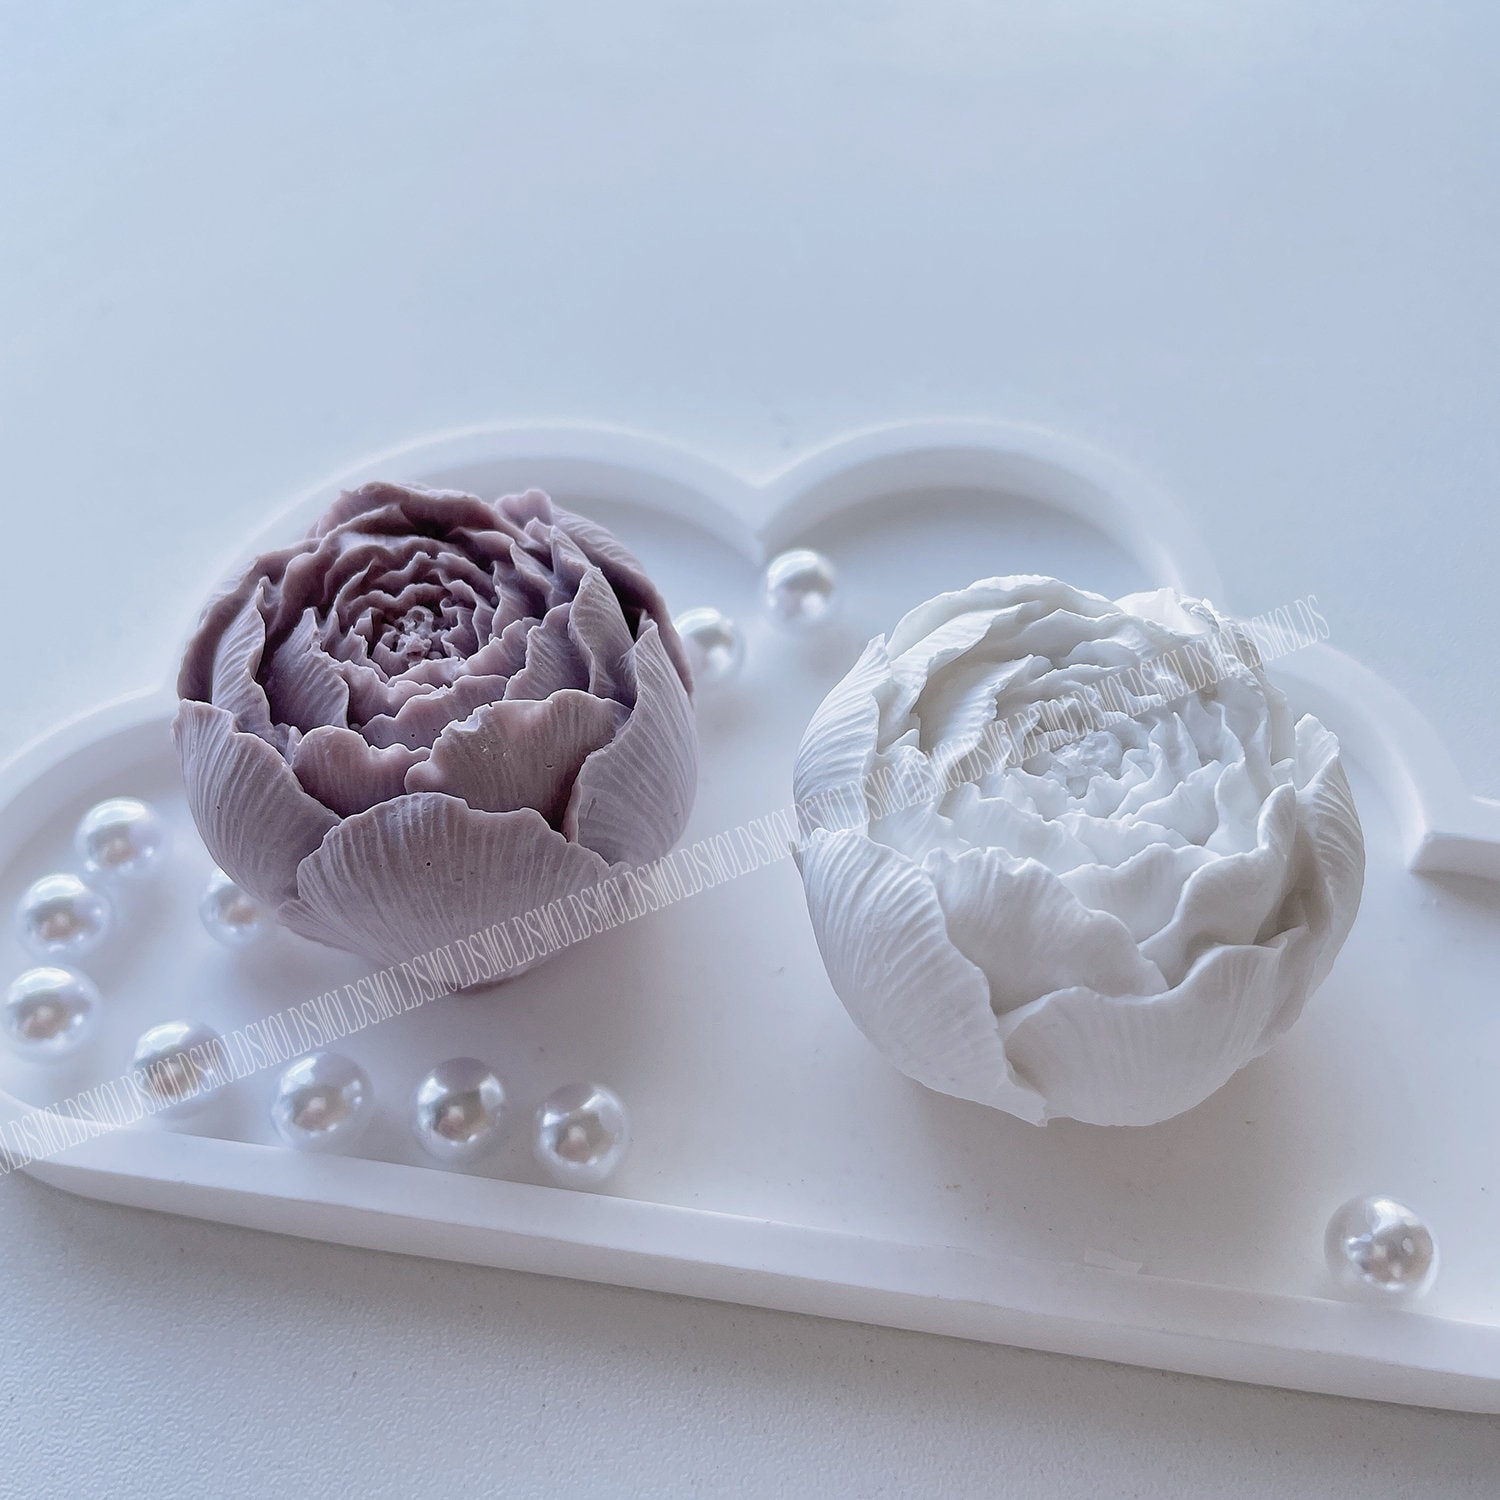 Rose Bud Big Flower Silicone Mold Soap Molds 3D Rose Bud Mold Baking Flower  Mold Candle Soap Flower Bud Rose Mold Silicone Rose Molding 